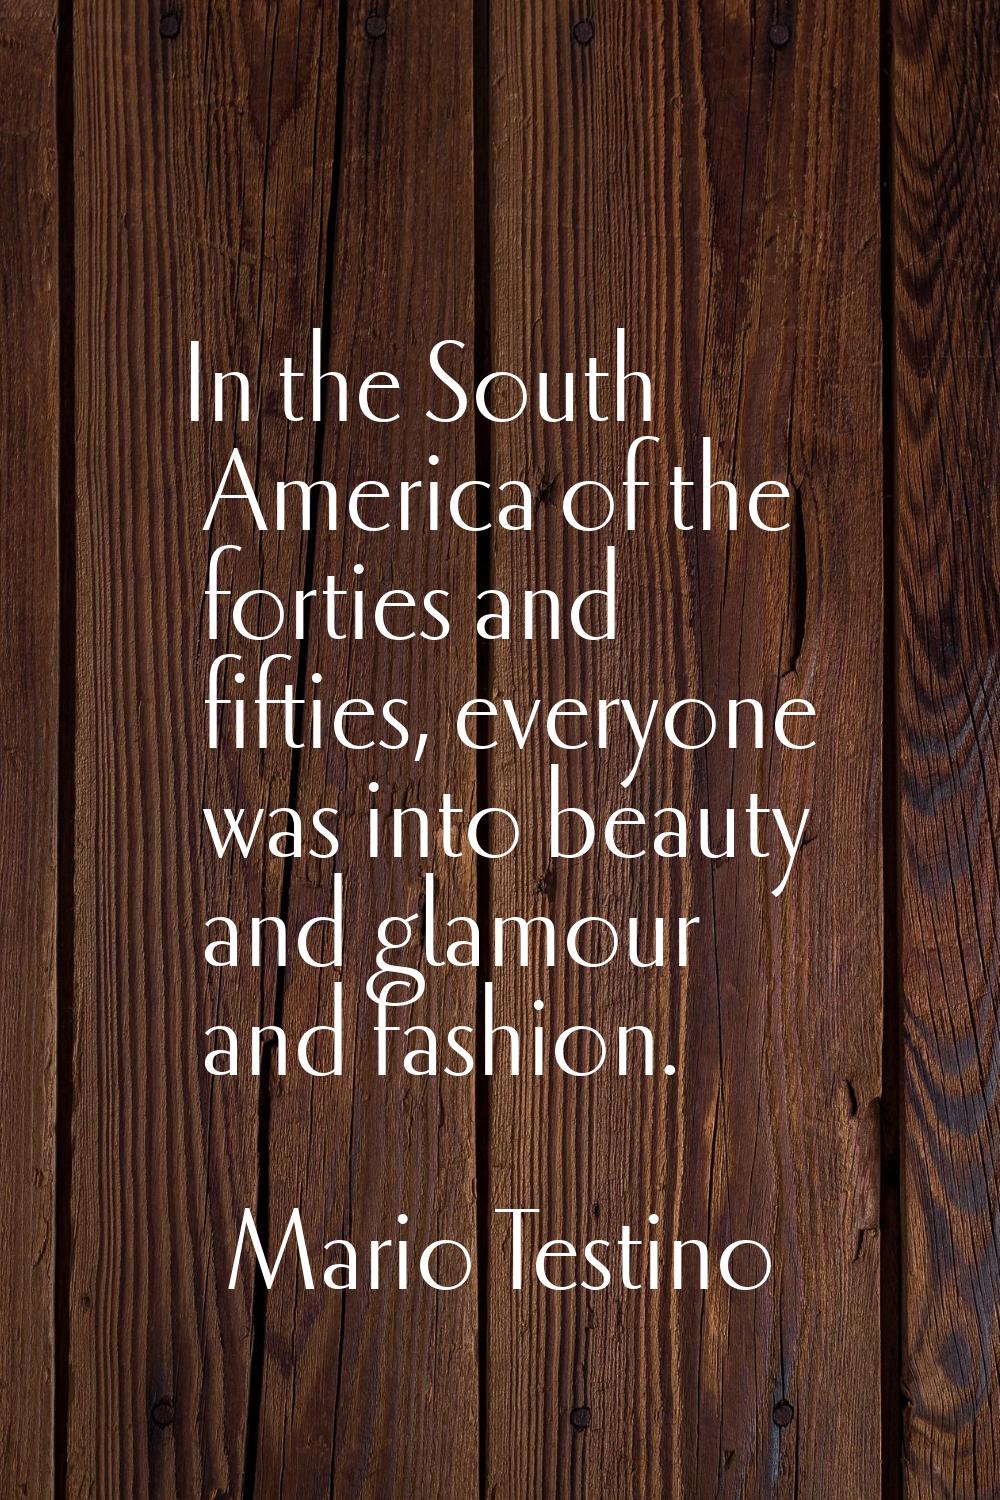 In the South America of the forties and fifties, everyone was into beauty and glamour and fashion.